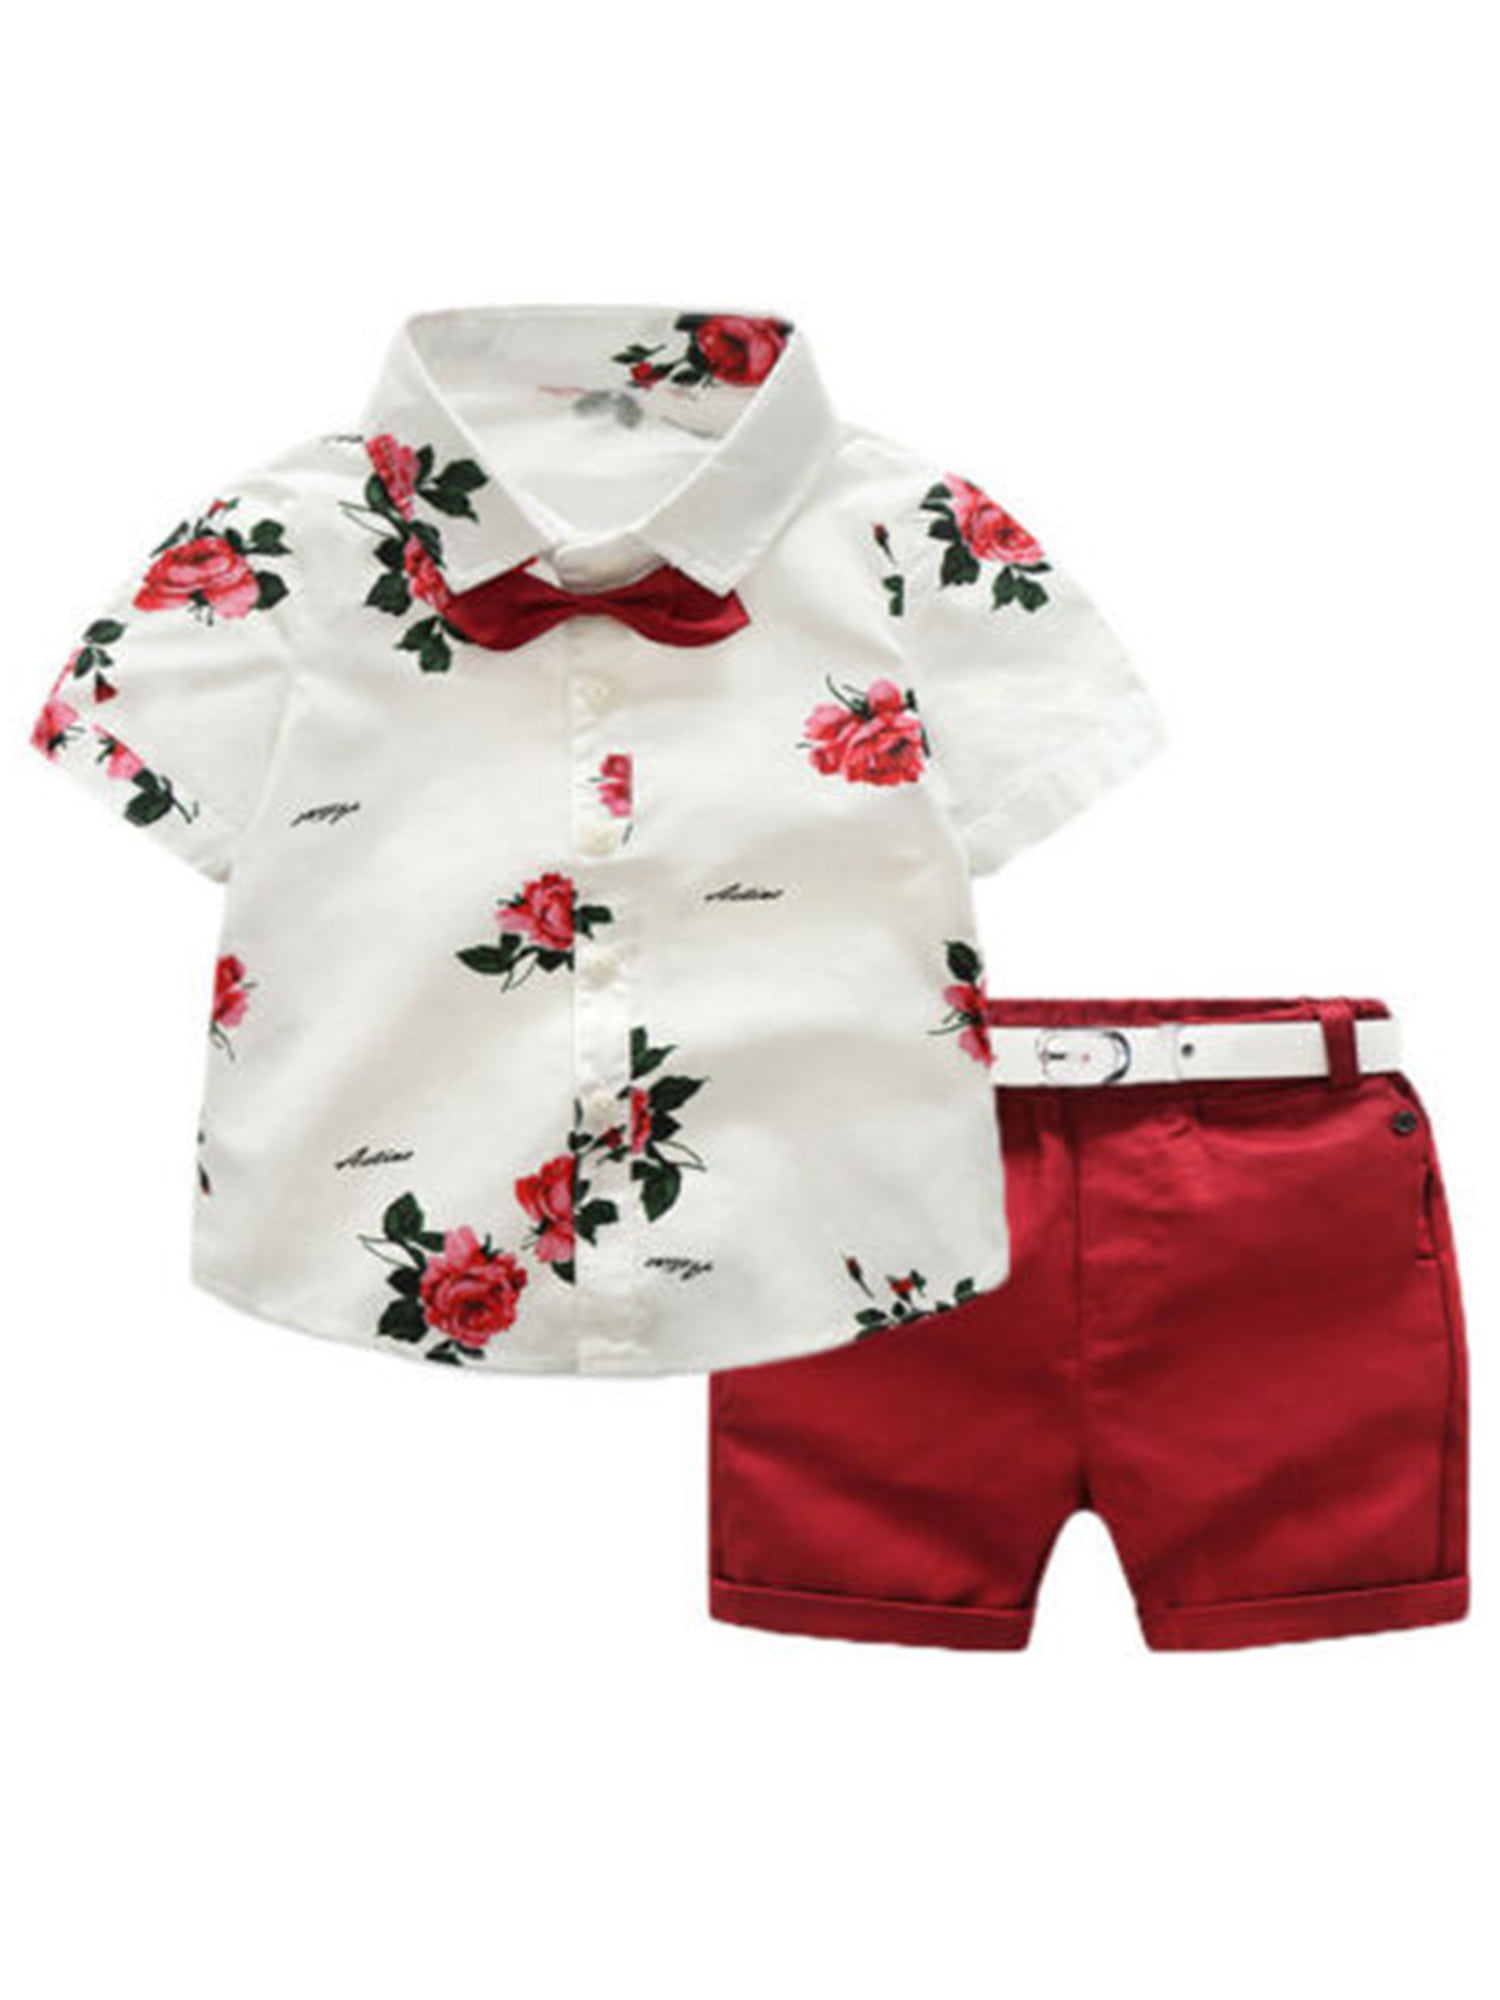 Toddler Baby Boys Summer Print Shirt Outfits Clothes Short Sleeve Button Down Tops Shorts Set 